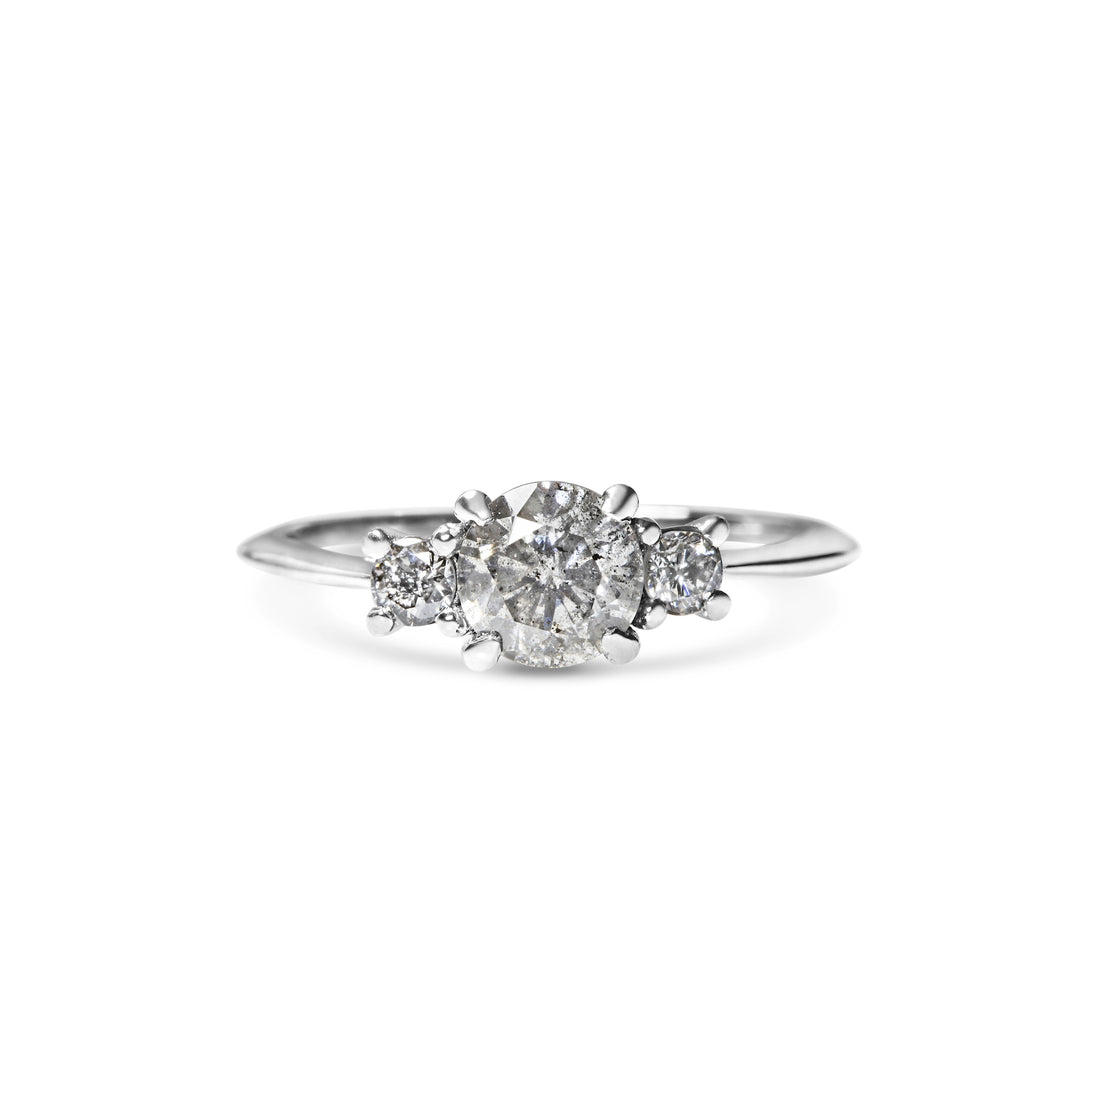  Salt & Pepper Diamond Trilogy Ring by Michelle Oh | The Cut London